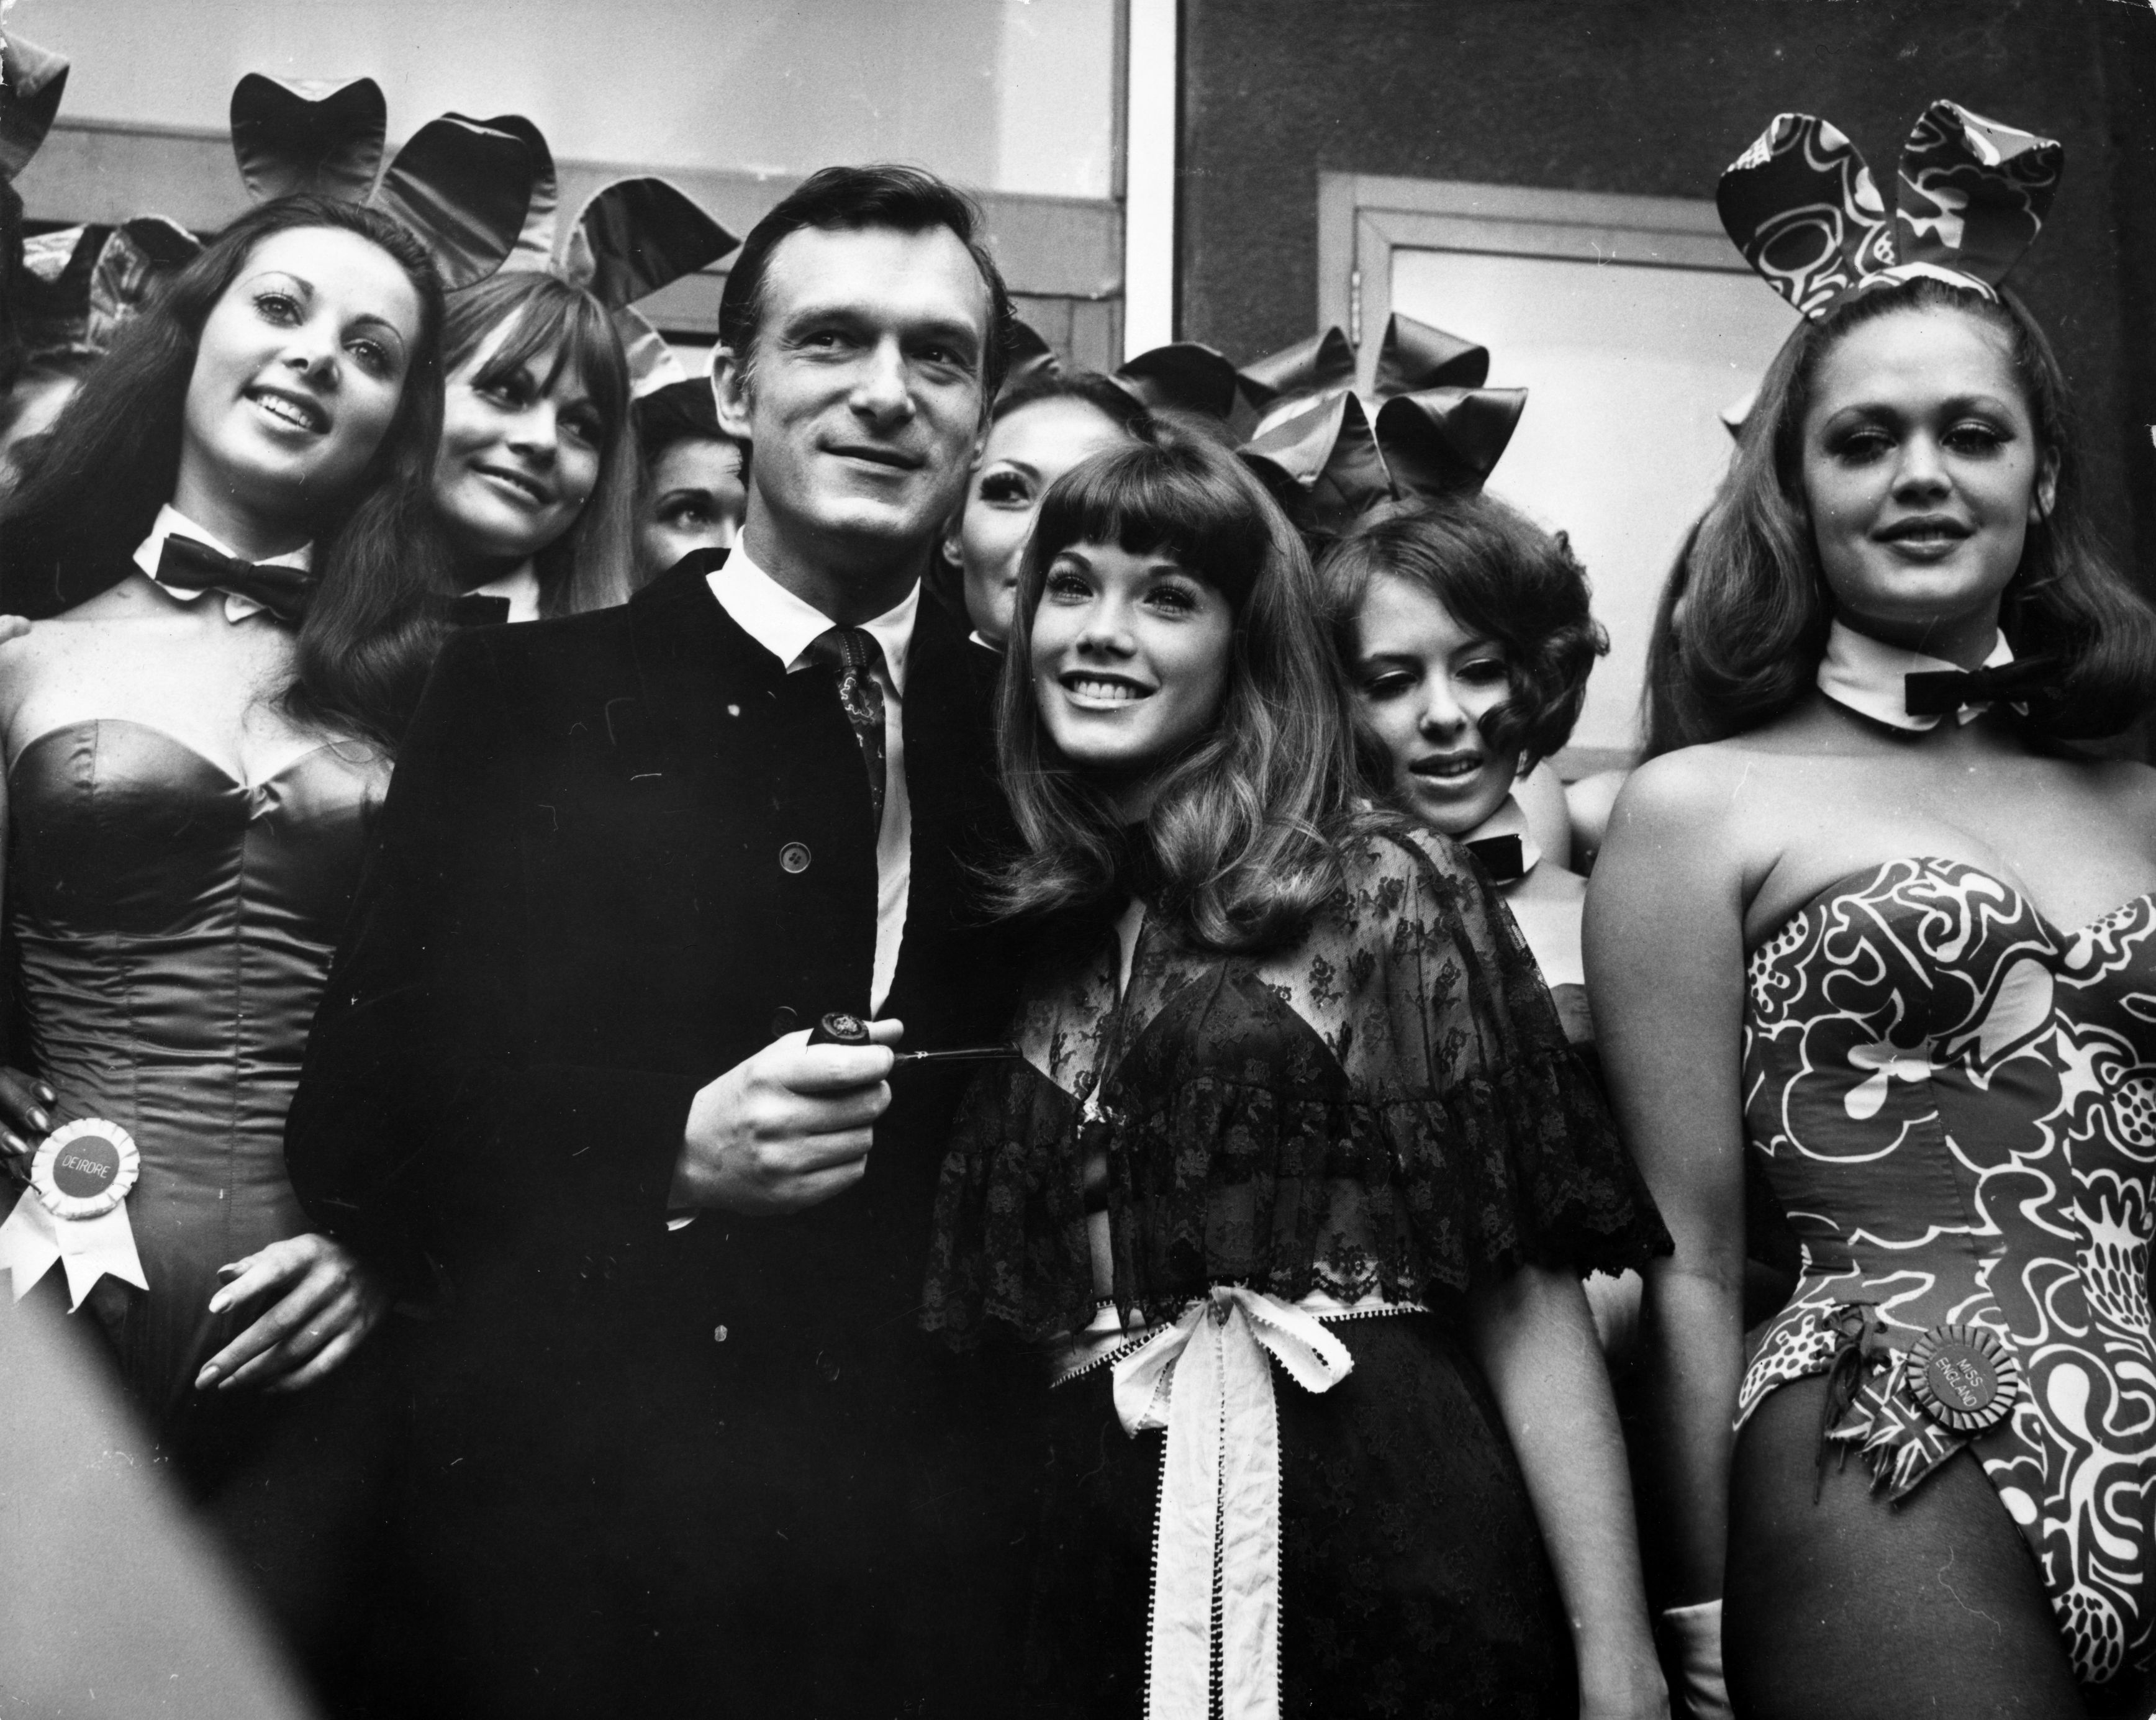 Cute Teen Orgy - Sedatives, orgies and bestiality: The documentary that shines a light on  historical abuse at Hugh Hefner's Playboy mansion | U.S. | EL PAÃS English